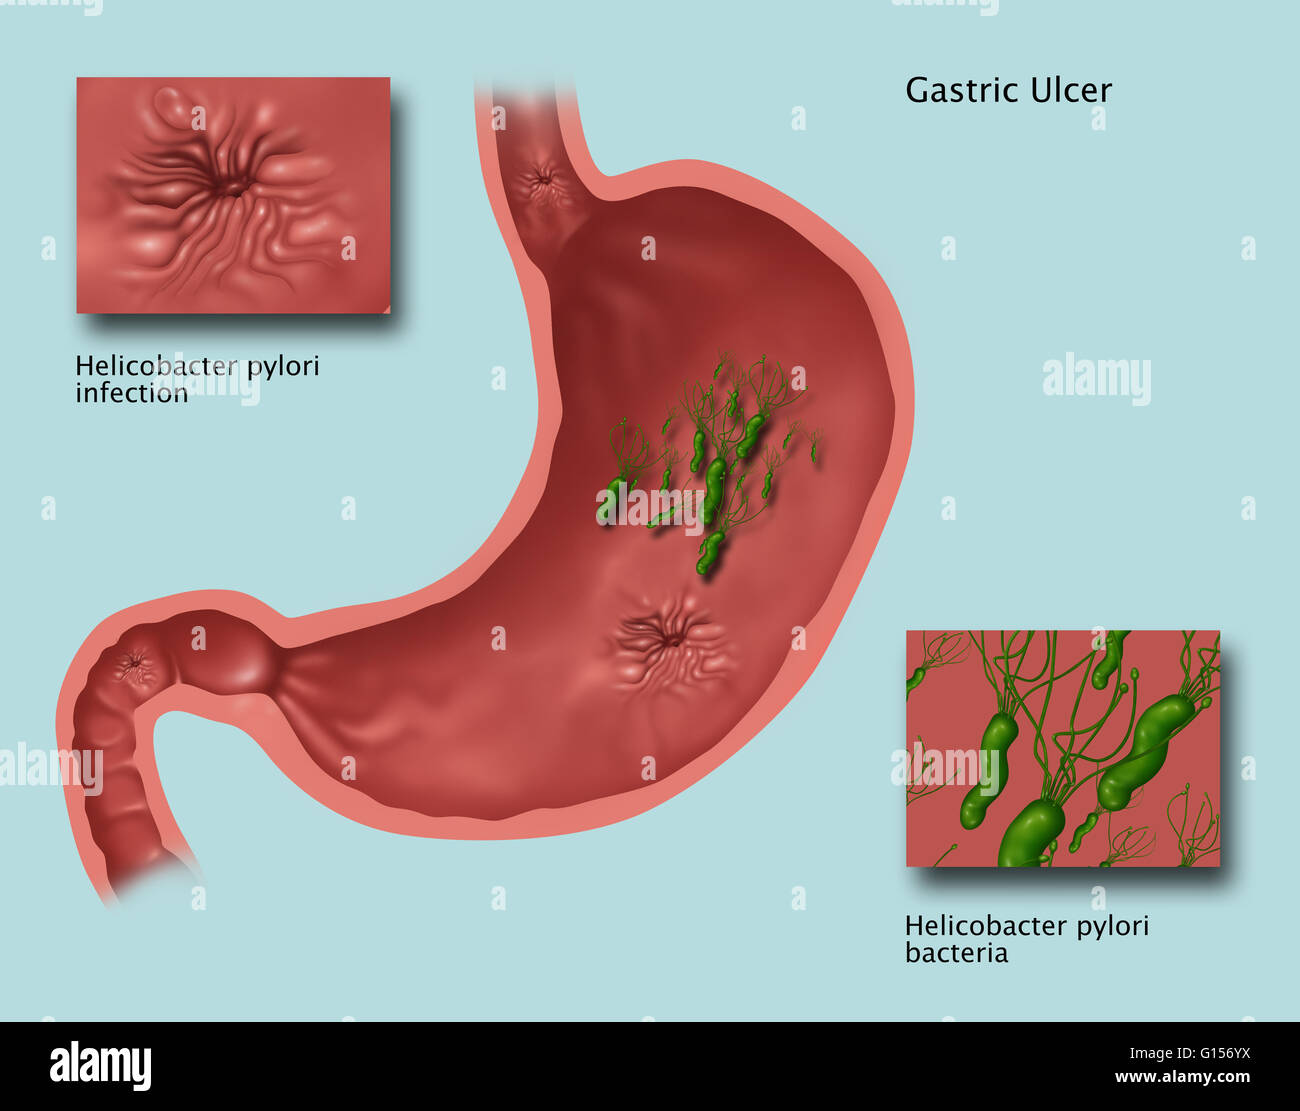 Illustration Showing The Stomach With A Gastric Ulcer Caused By